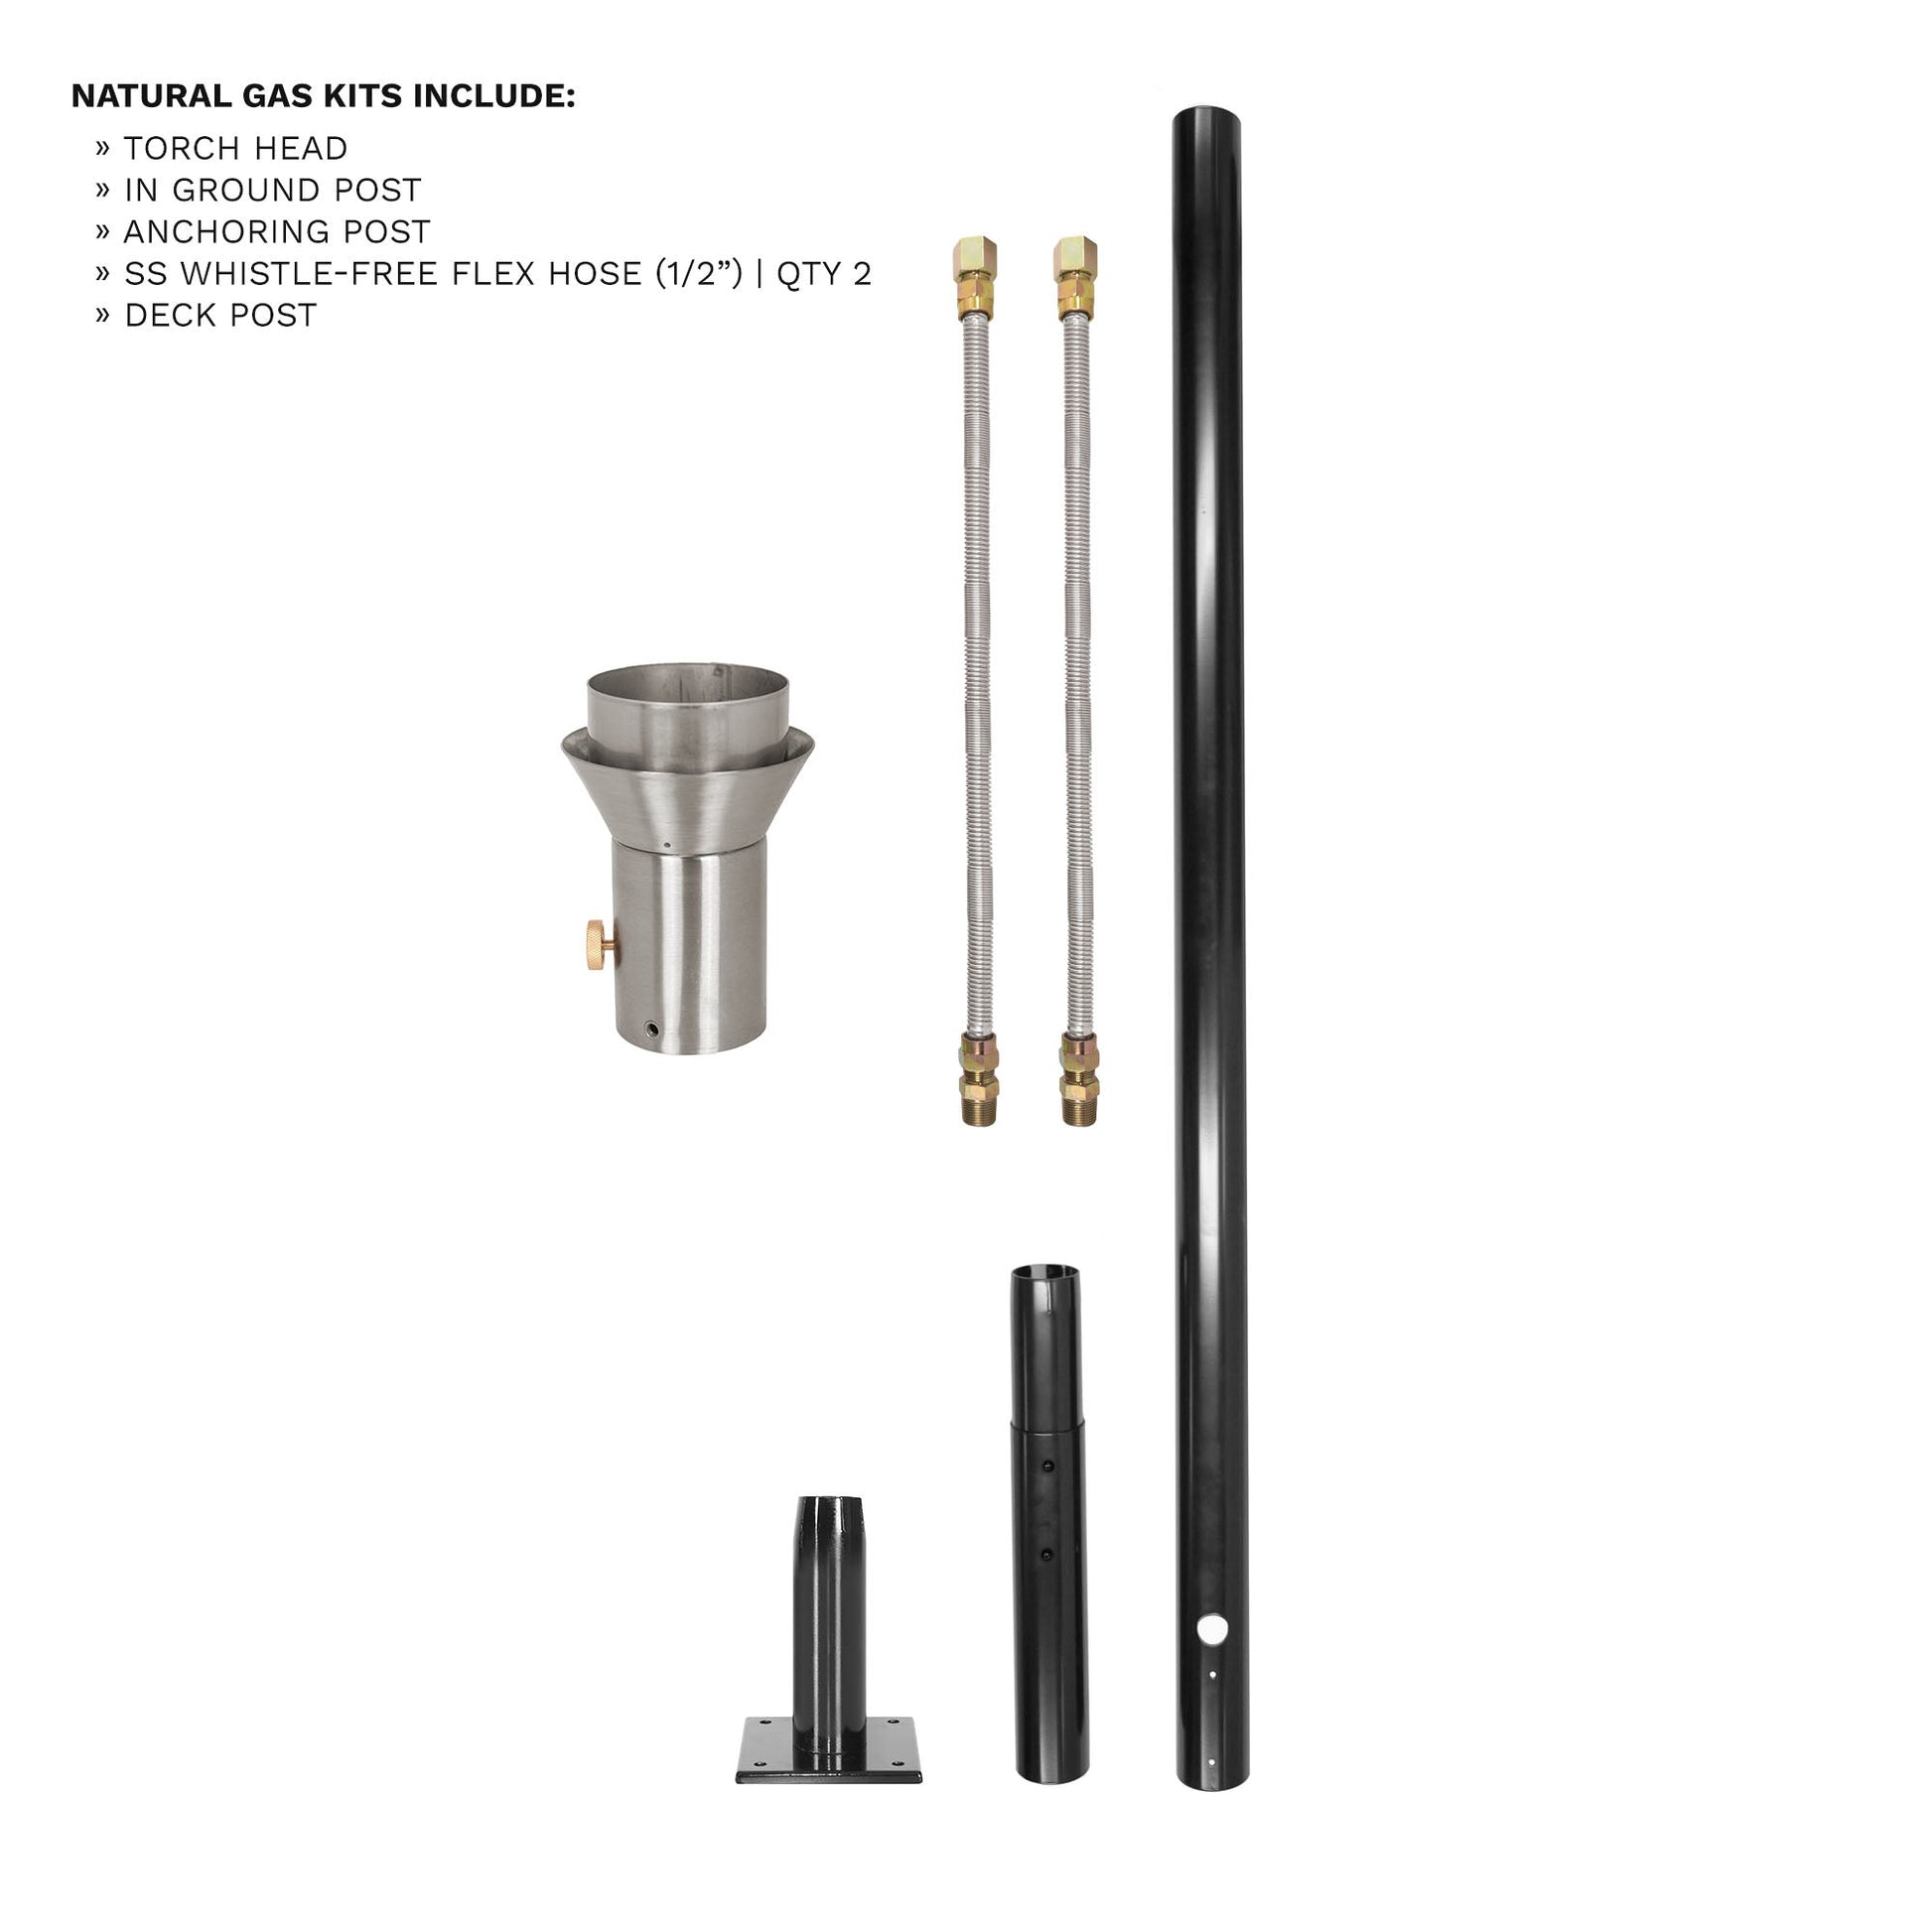 Hawi Original TOP Torch & Post Complete Kit - Stainless Steel - Natural Gas-Novel Home